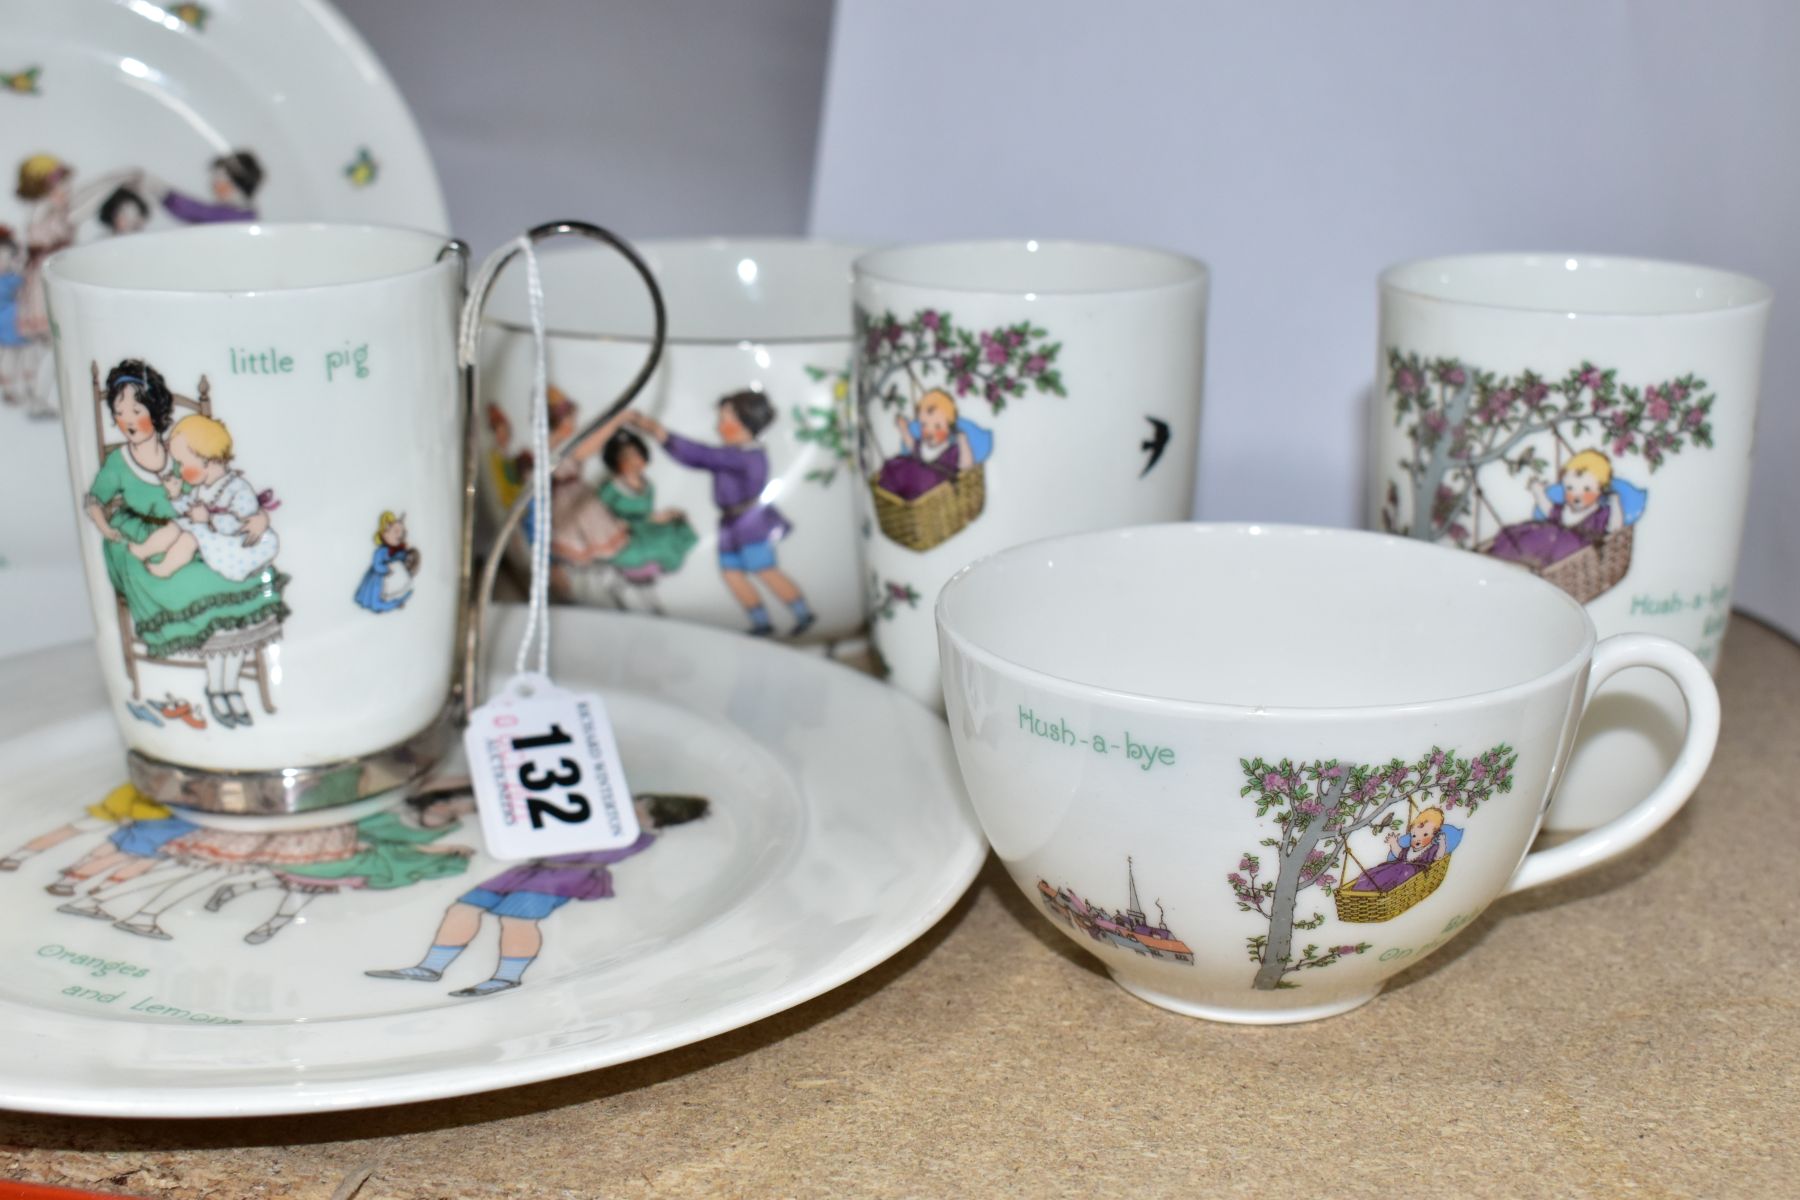 NINE PIECES OF ROYAL DOULTON CHINA NURSERY RHYMES L SERIES WARE, PRINTED WITH DESIGNS IN THE STYLE - Image 4 of 6